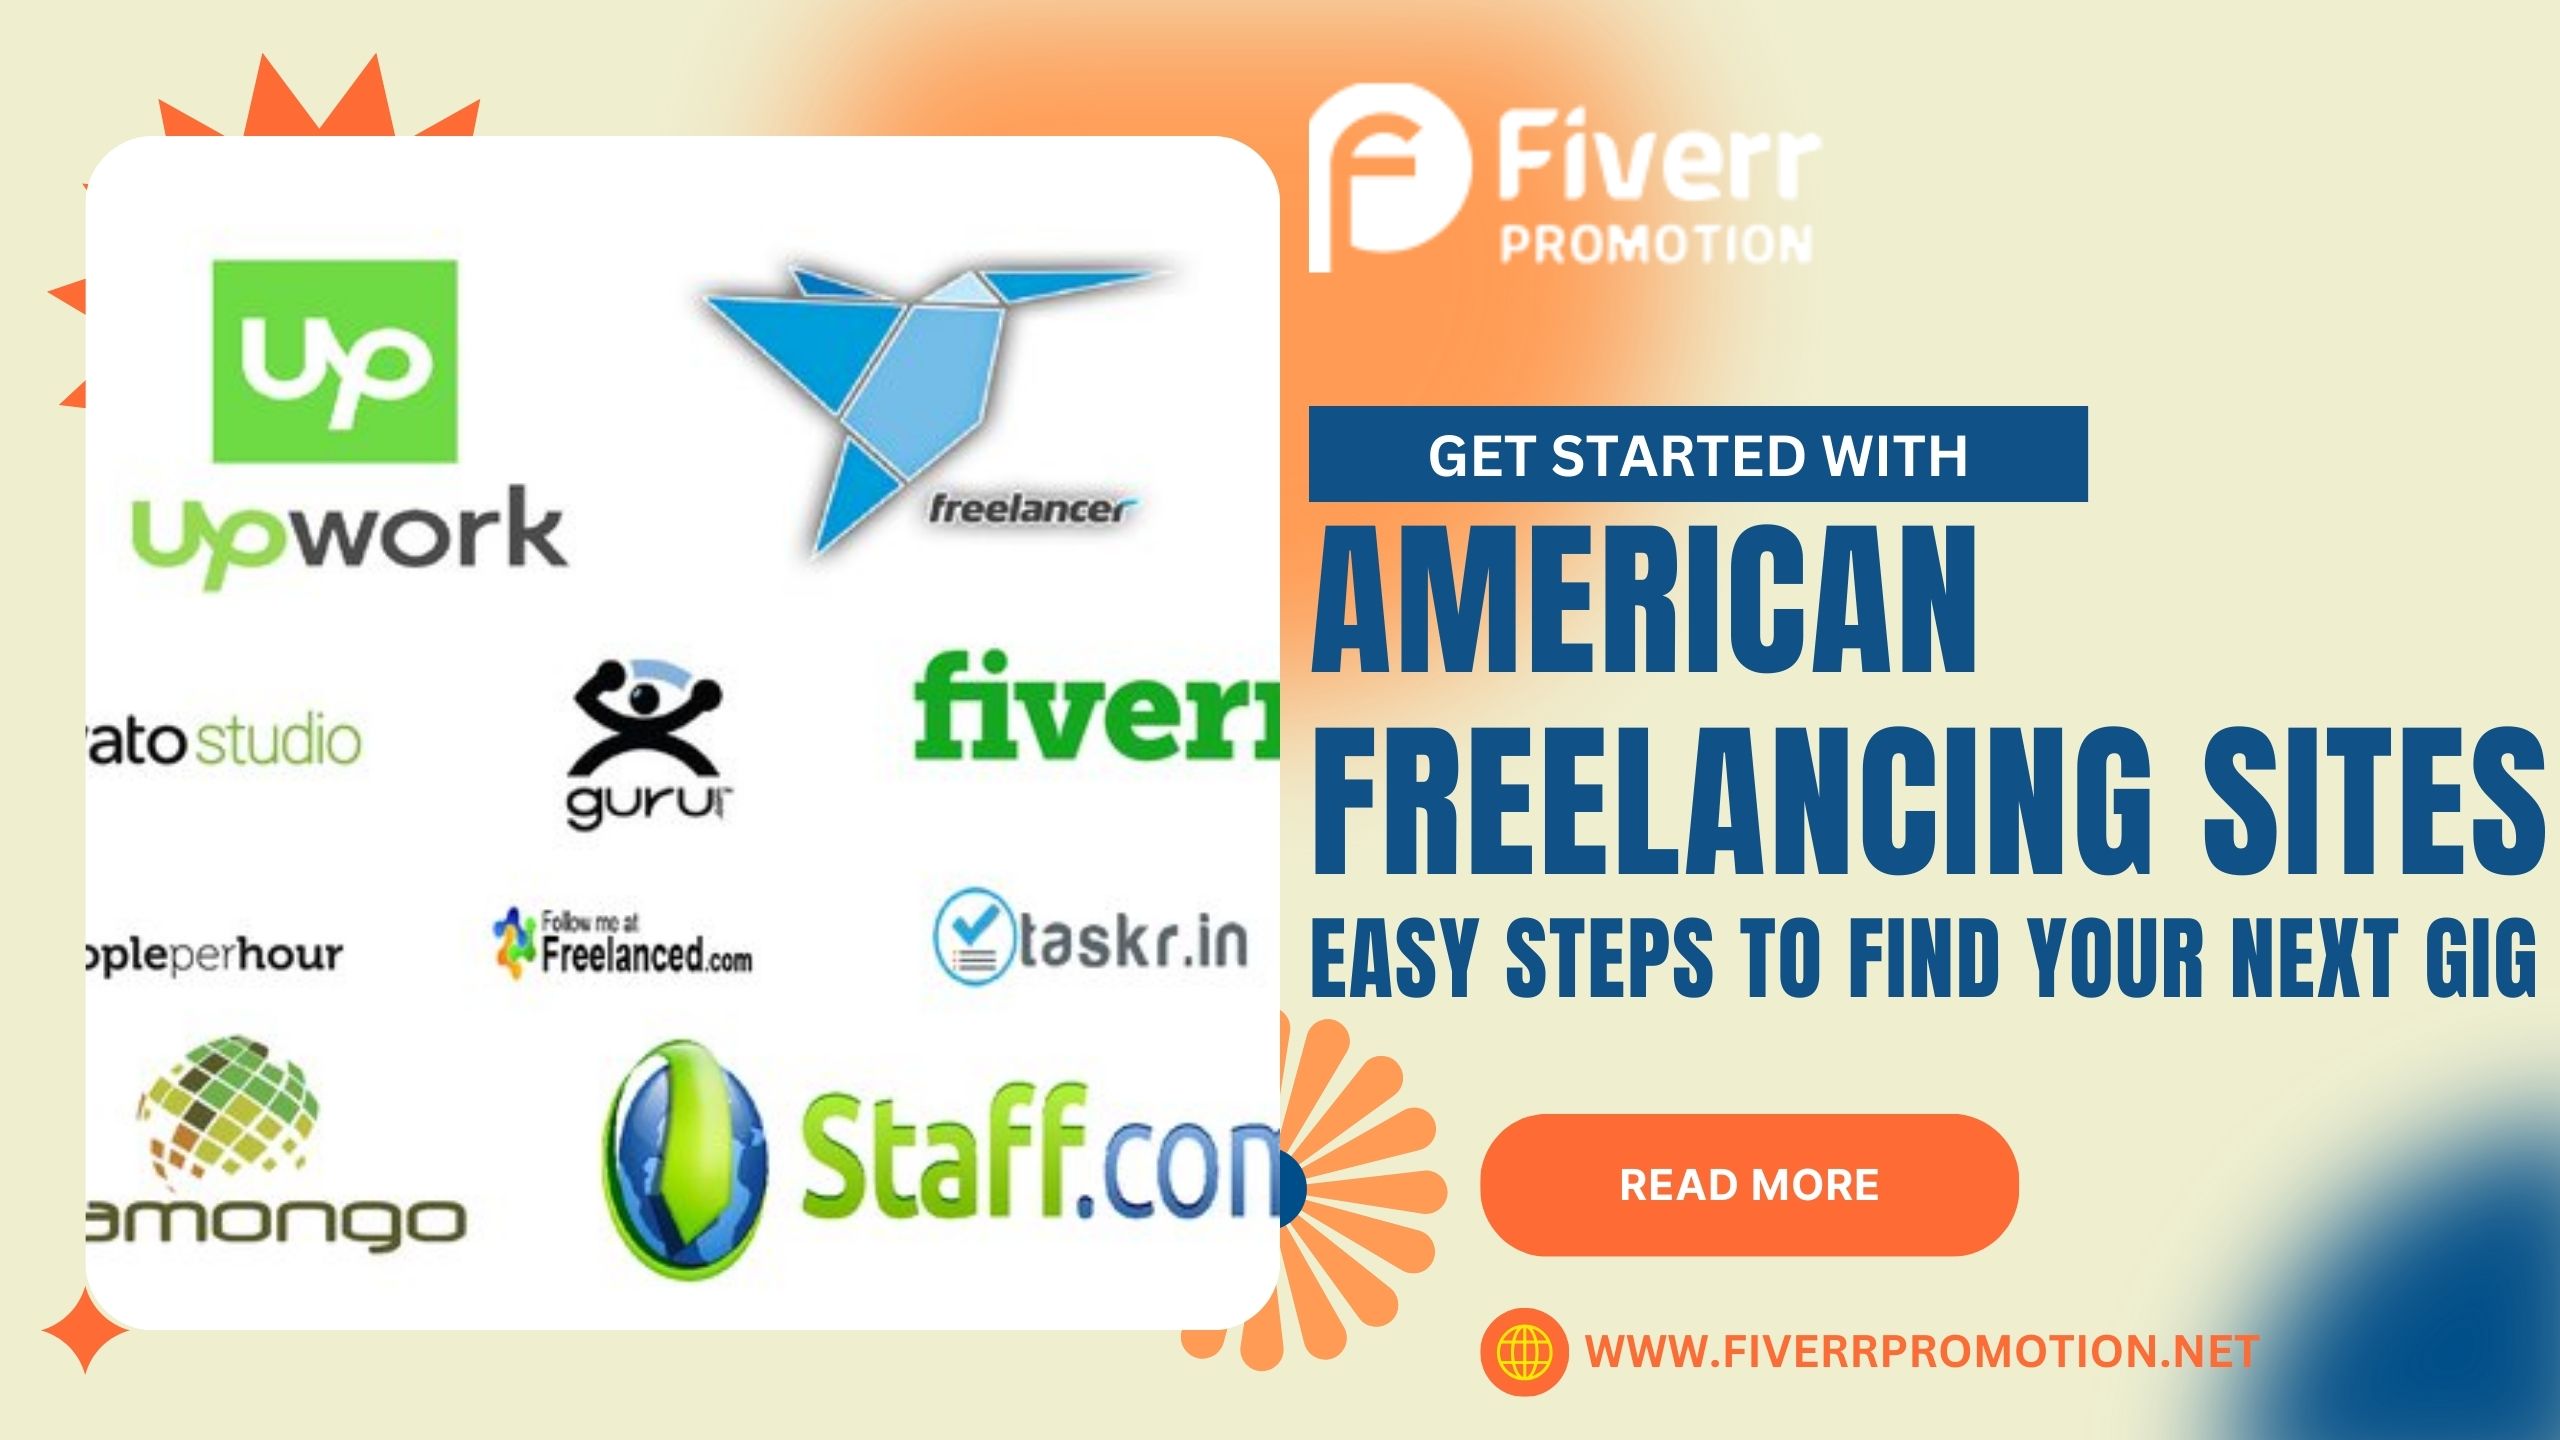 Get Started with American Freelancing Sites: Easy Steps to Find Your Next Gig